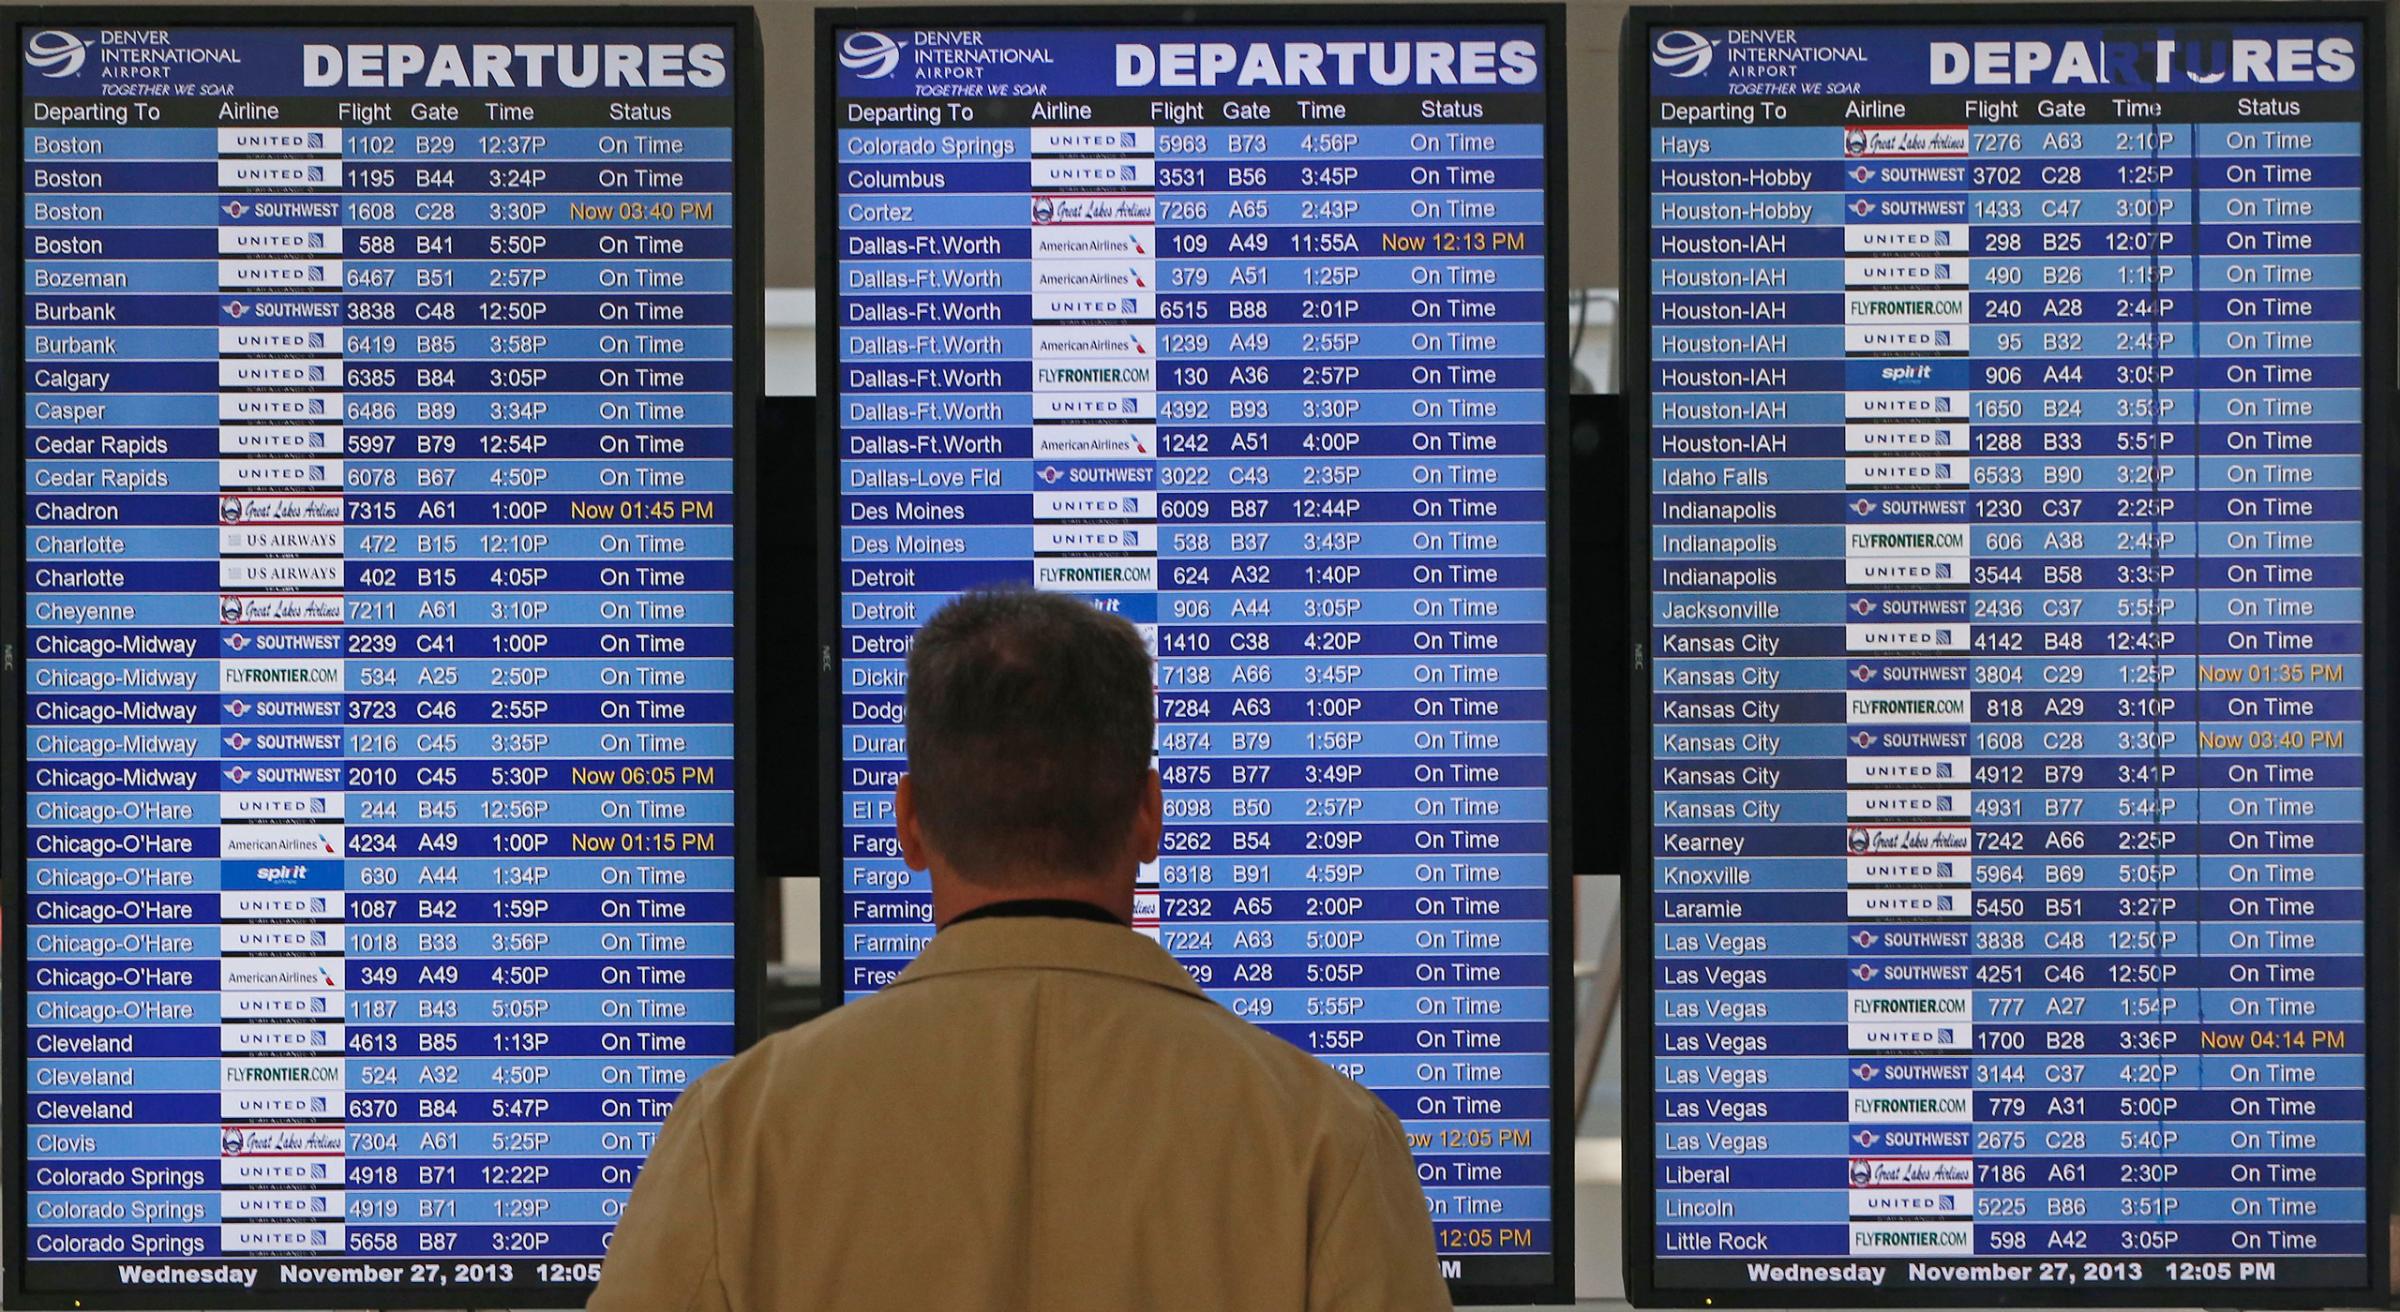 On the busiest travel day of the year, a passenger checks the departures board in a terminal at Denver International Airport, Wednesday, Nov. 27, 2013. More than 43 million people are to travel over the long holiday weekend, according to AAA. (AP Photo/Brennan Linsley)